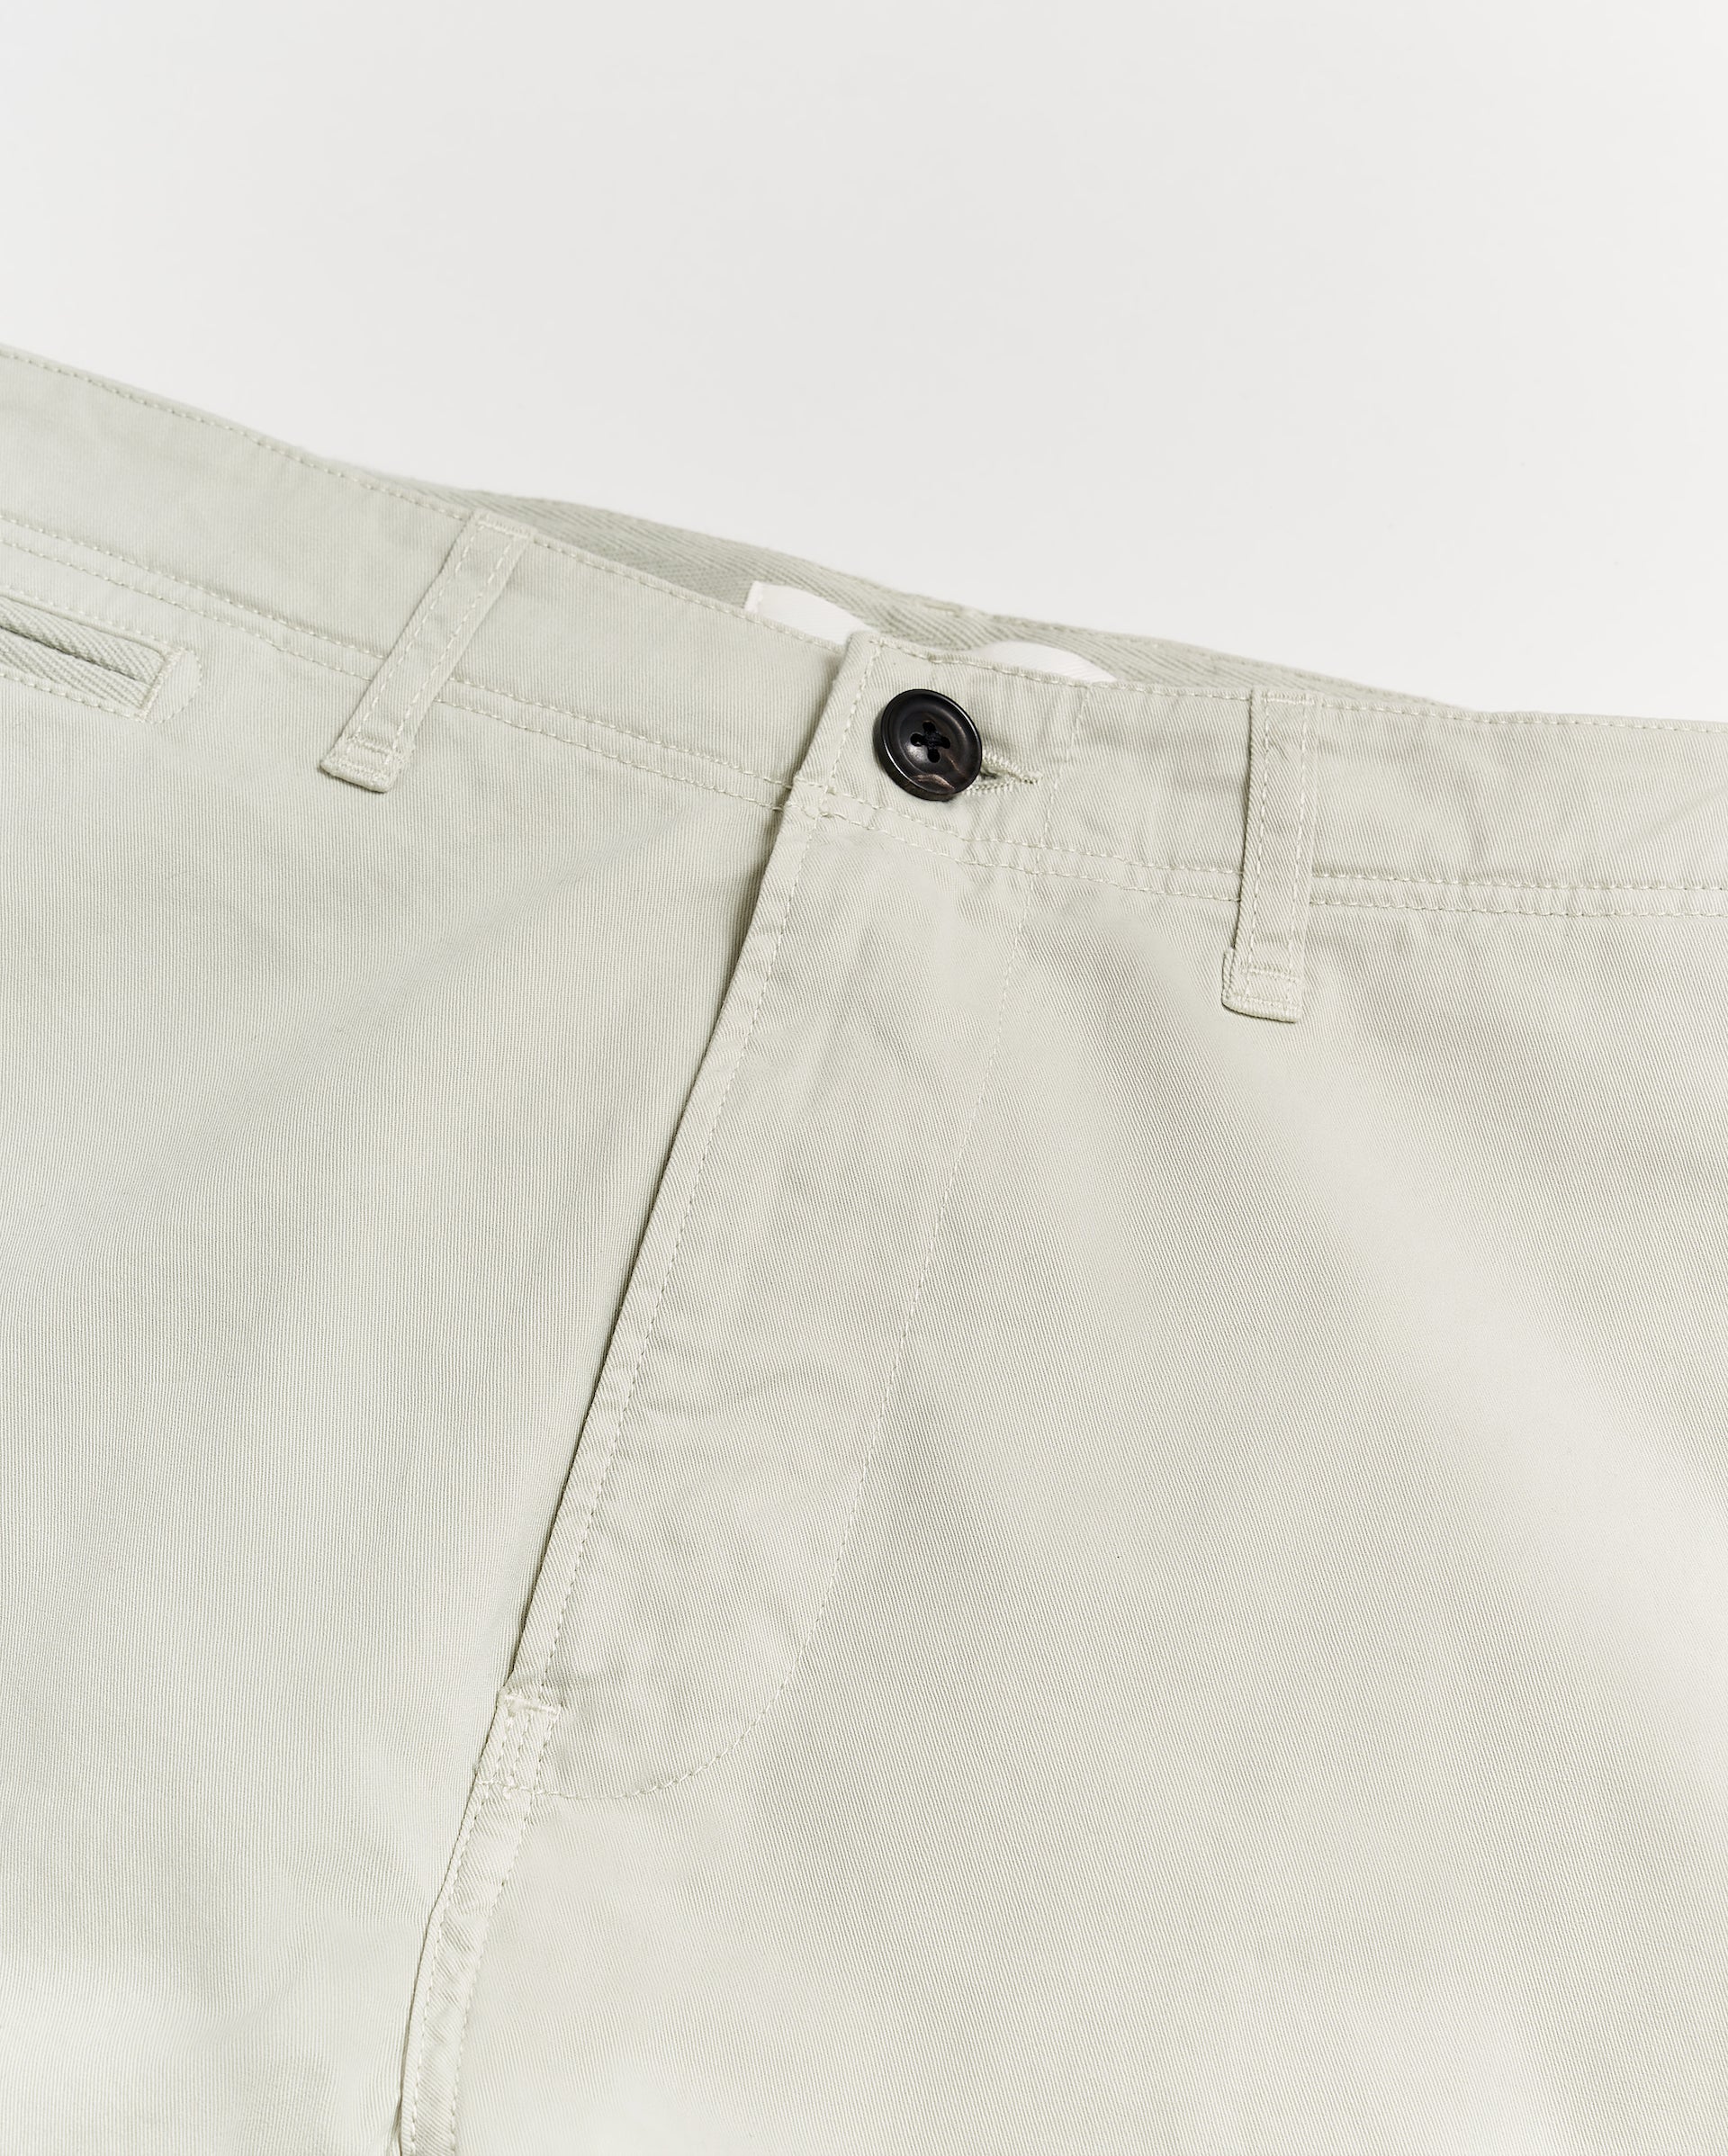 MENS REGULAR FIT CHINO TROUSERS  UNIQLO IN